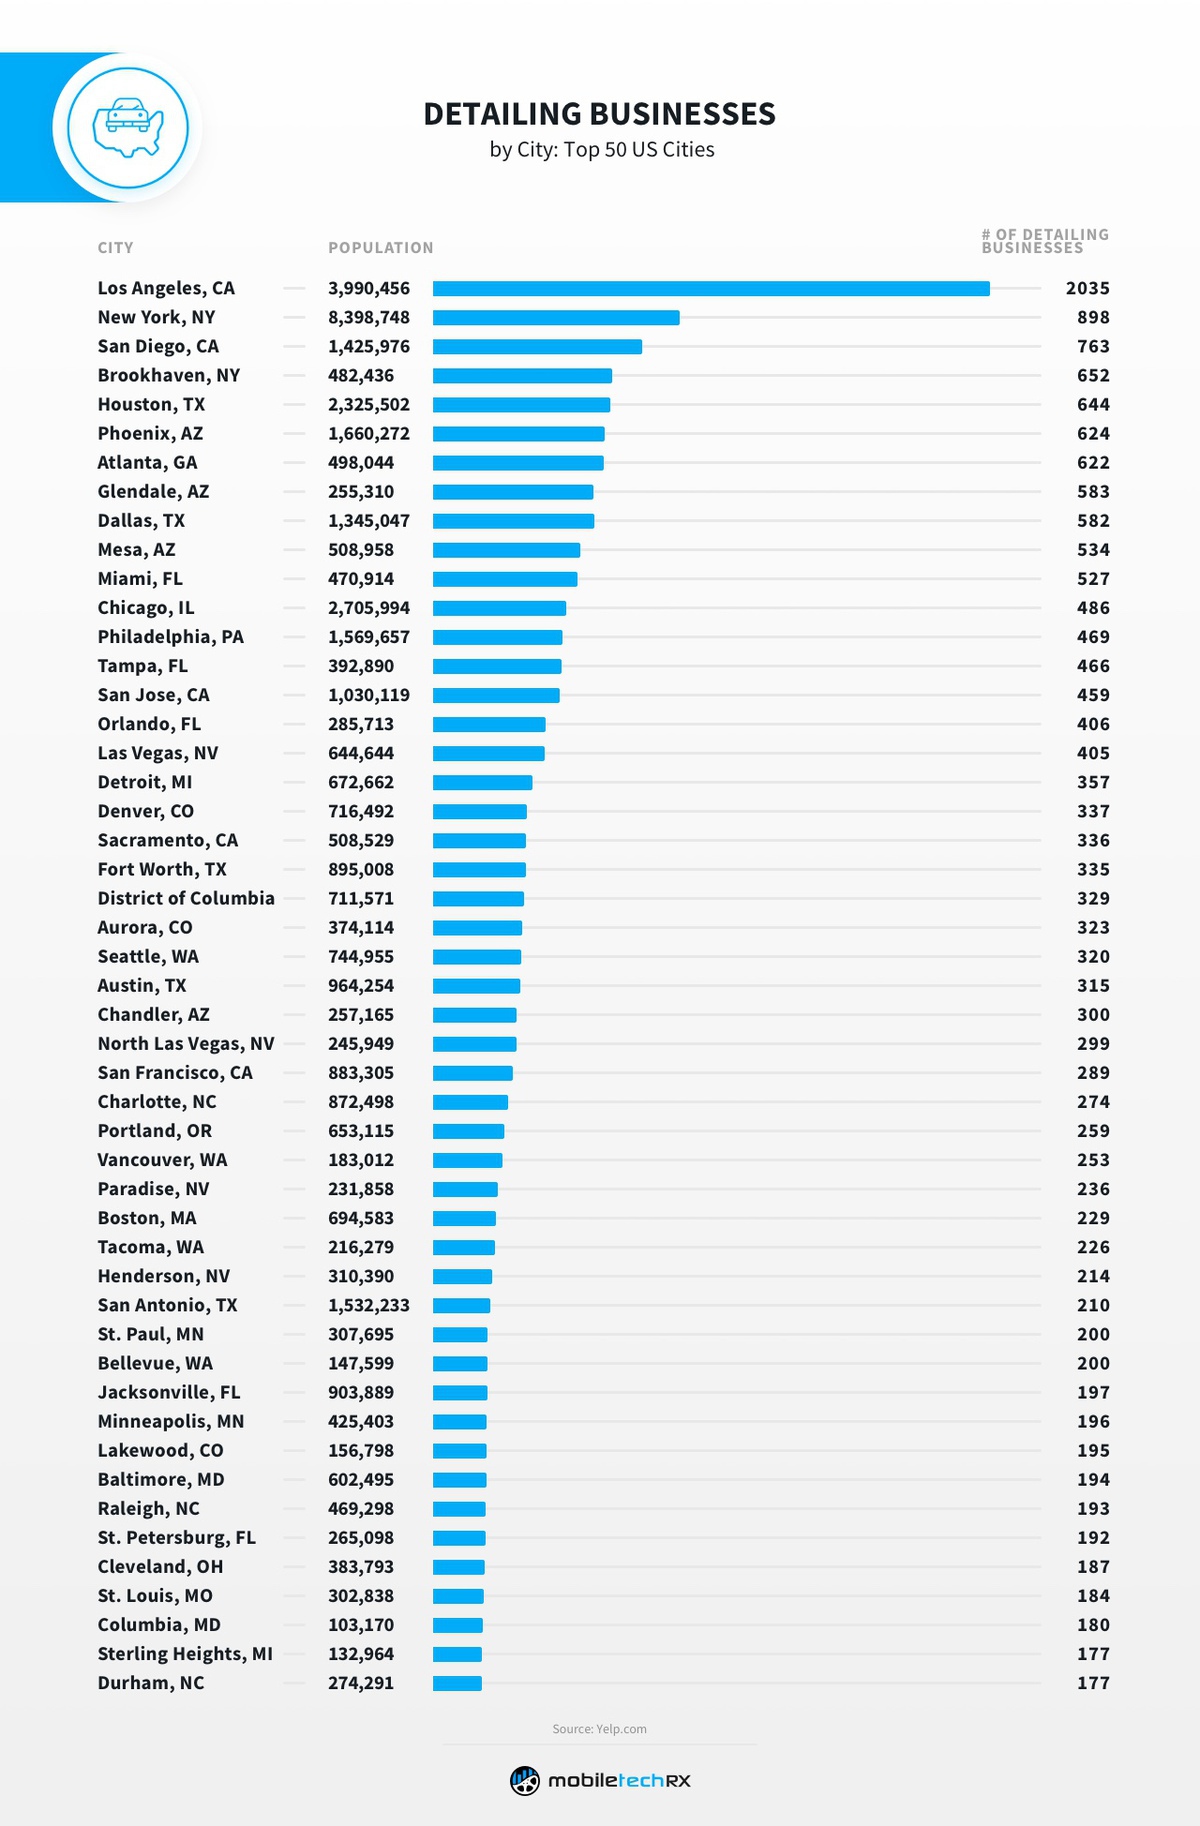 Detailing businesses in top 50 US cities bar graph